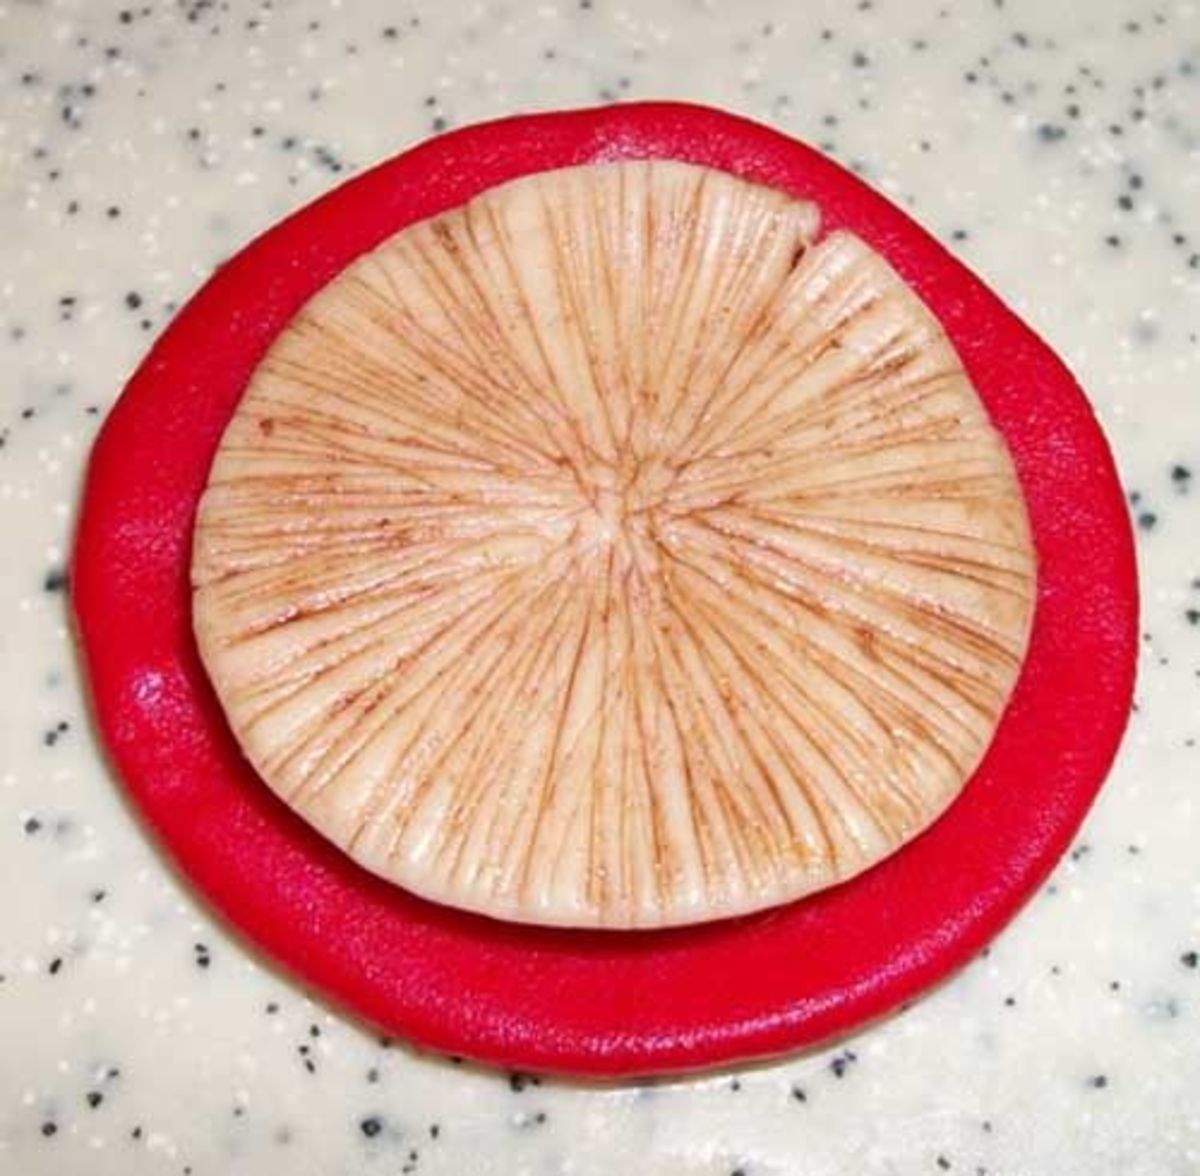 Press the red fondant circle on top of the off-white circle.